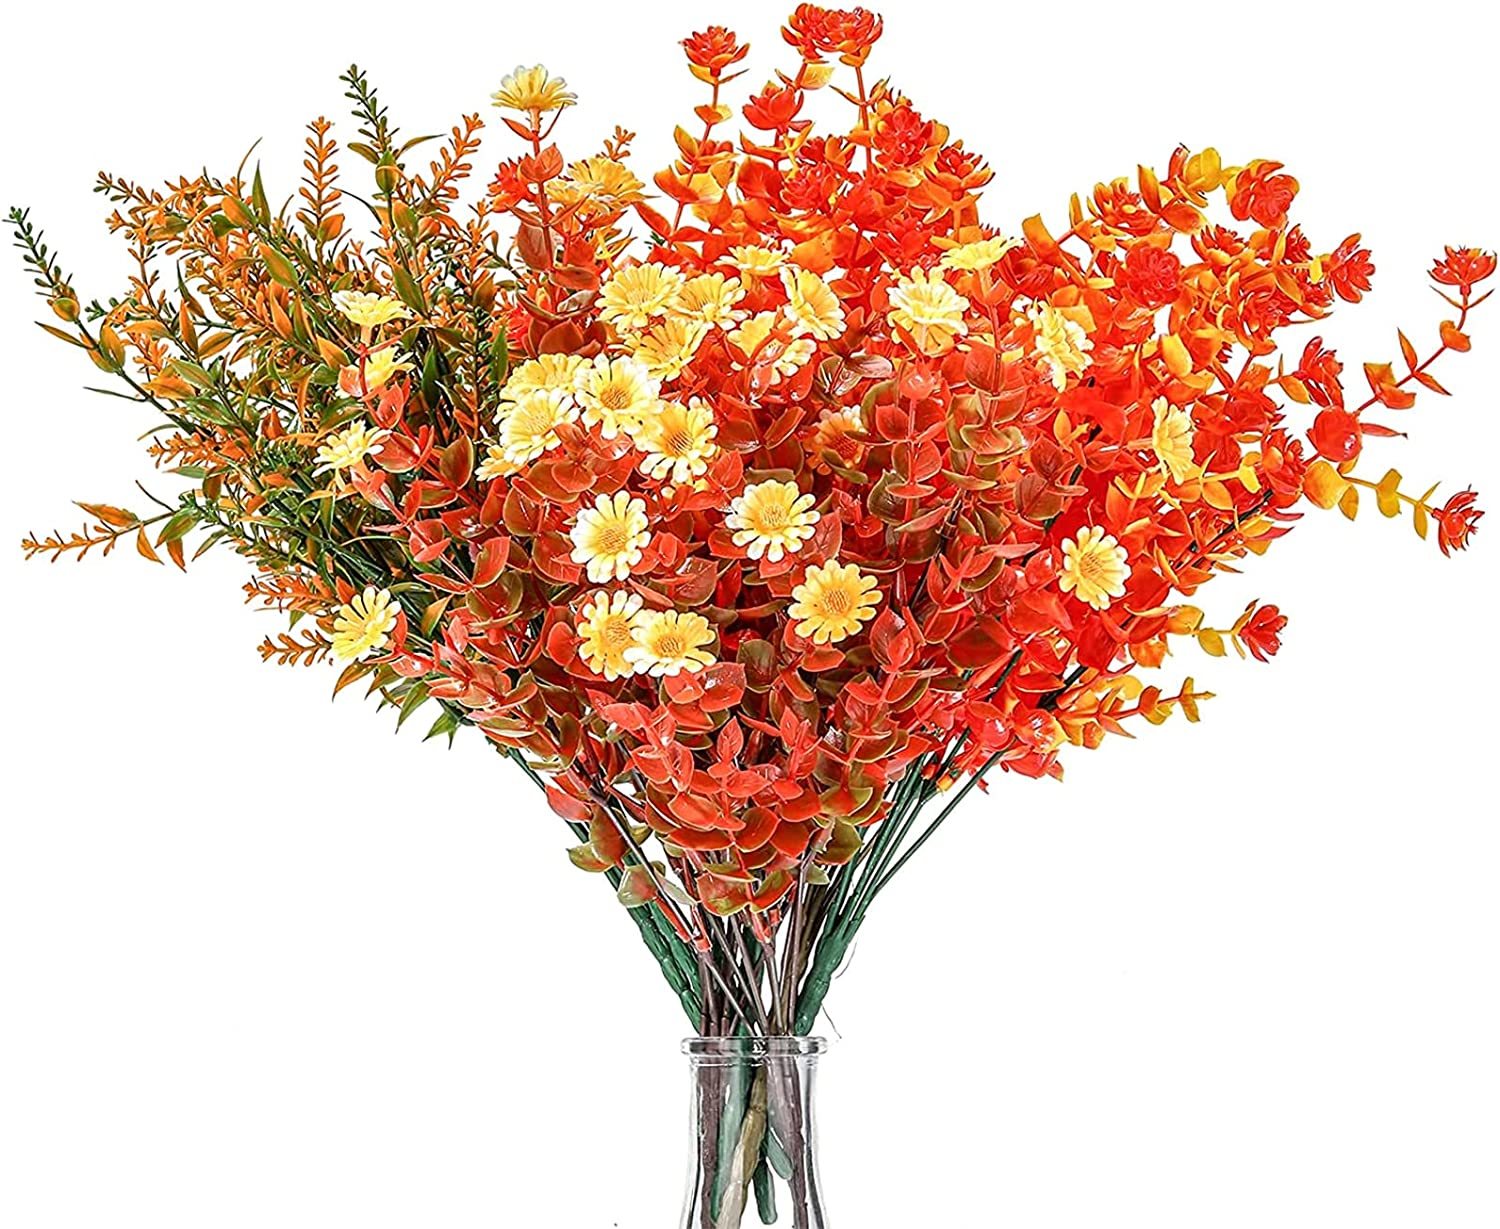 Primary image for Macting 12 Pcs Artificial Flowers Outdoor Fake Fall Flowers For Outside